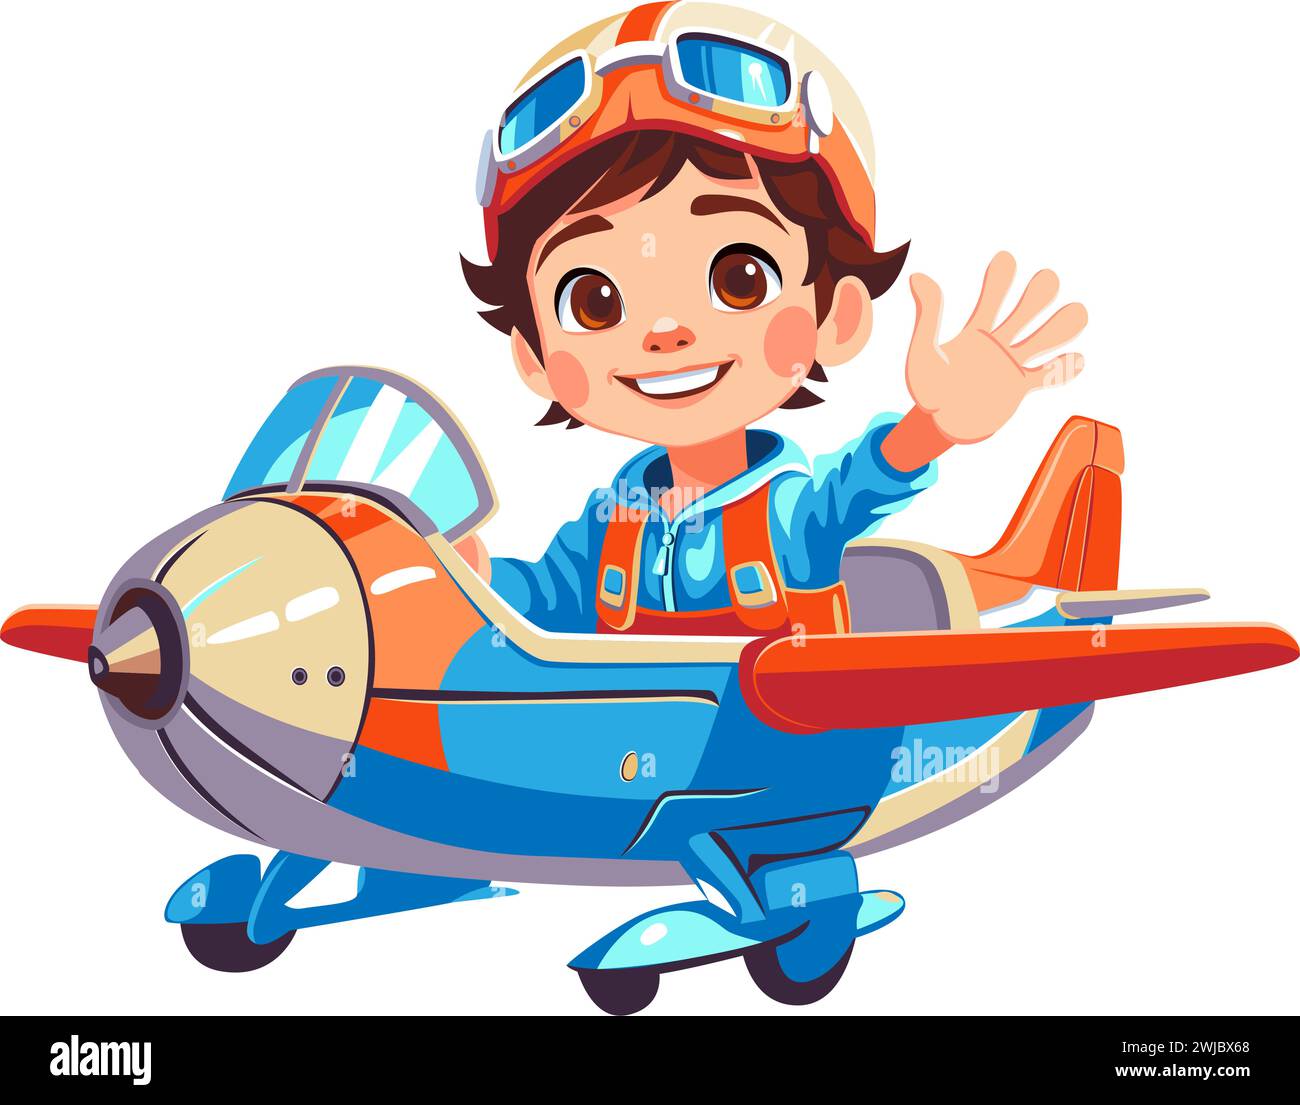 Cartoon kid pilot flying on toy airplane in sky, aviator goggles and happy smiling, isolated vector Stock Vector